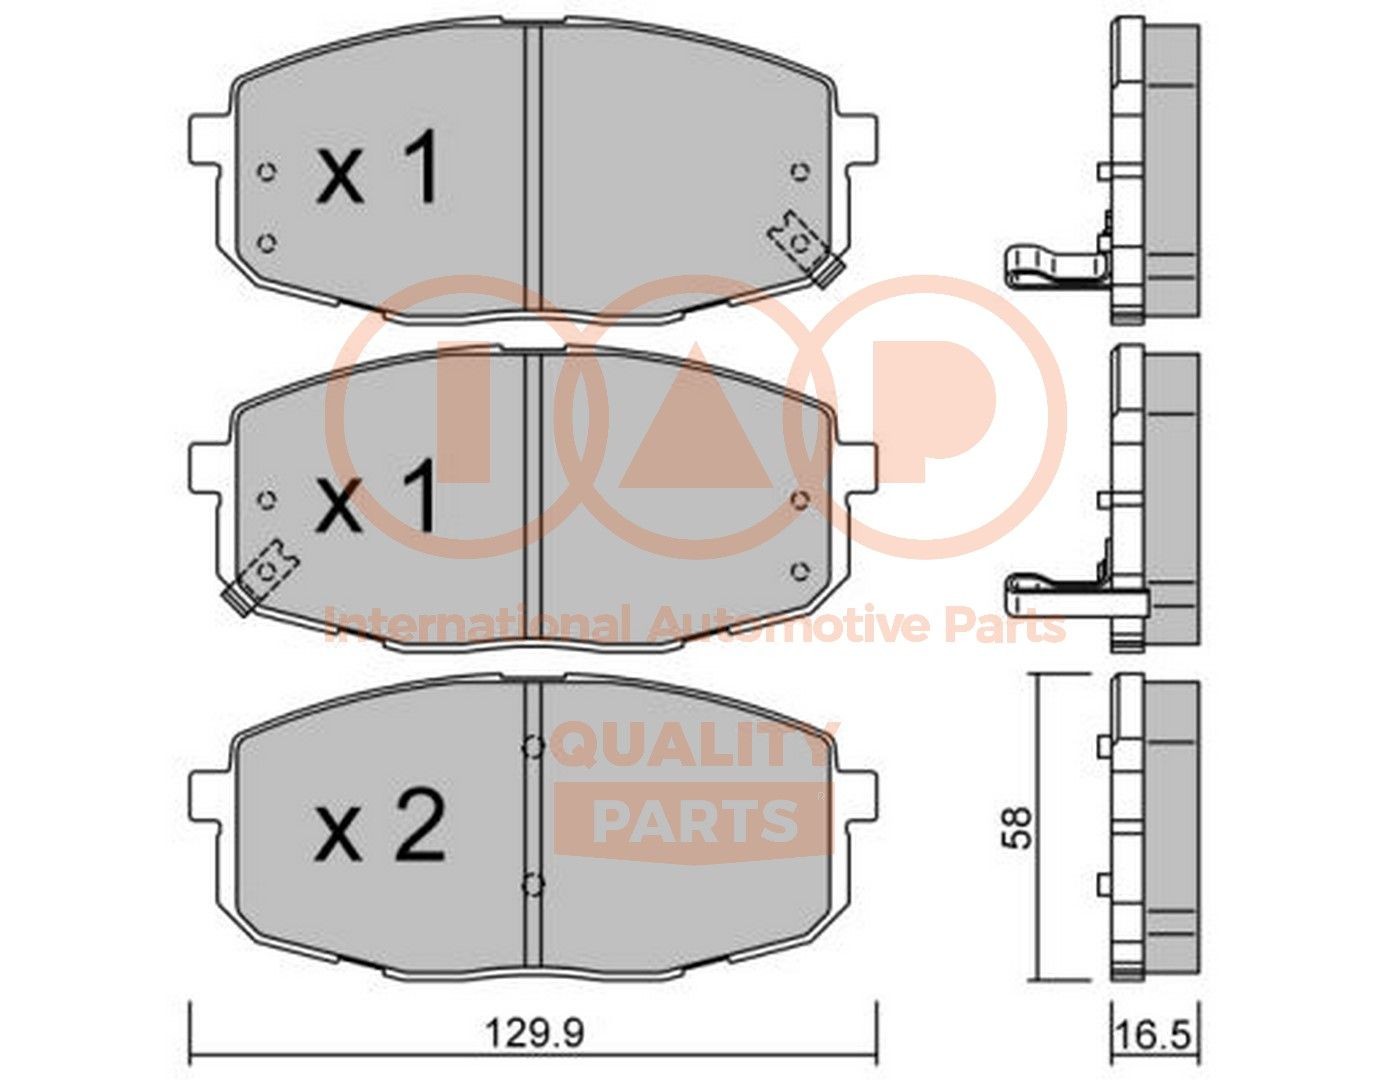 IAP QUALITY PARTS Front Axle Height 1: 58mm, Width 1: 129,9mm, Thickness 1: 16,5mm Brake pads 704-21100P buy